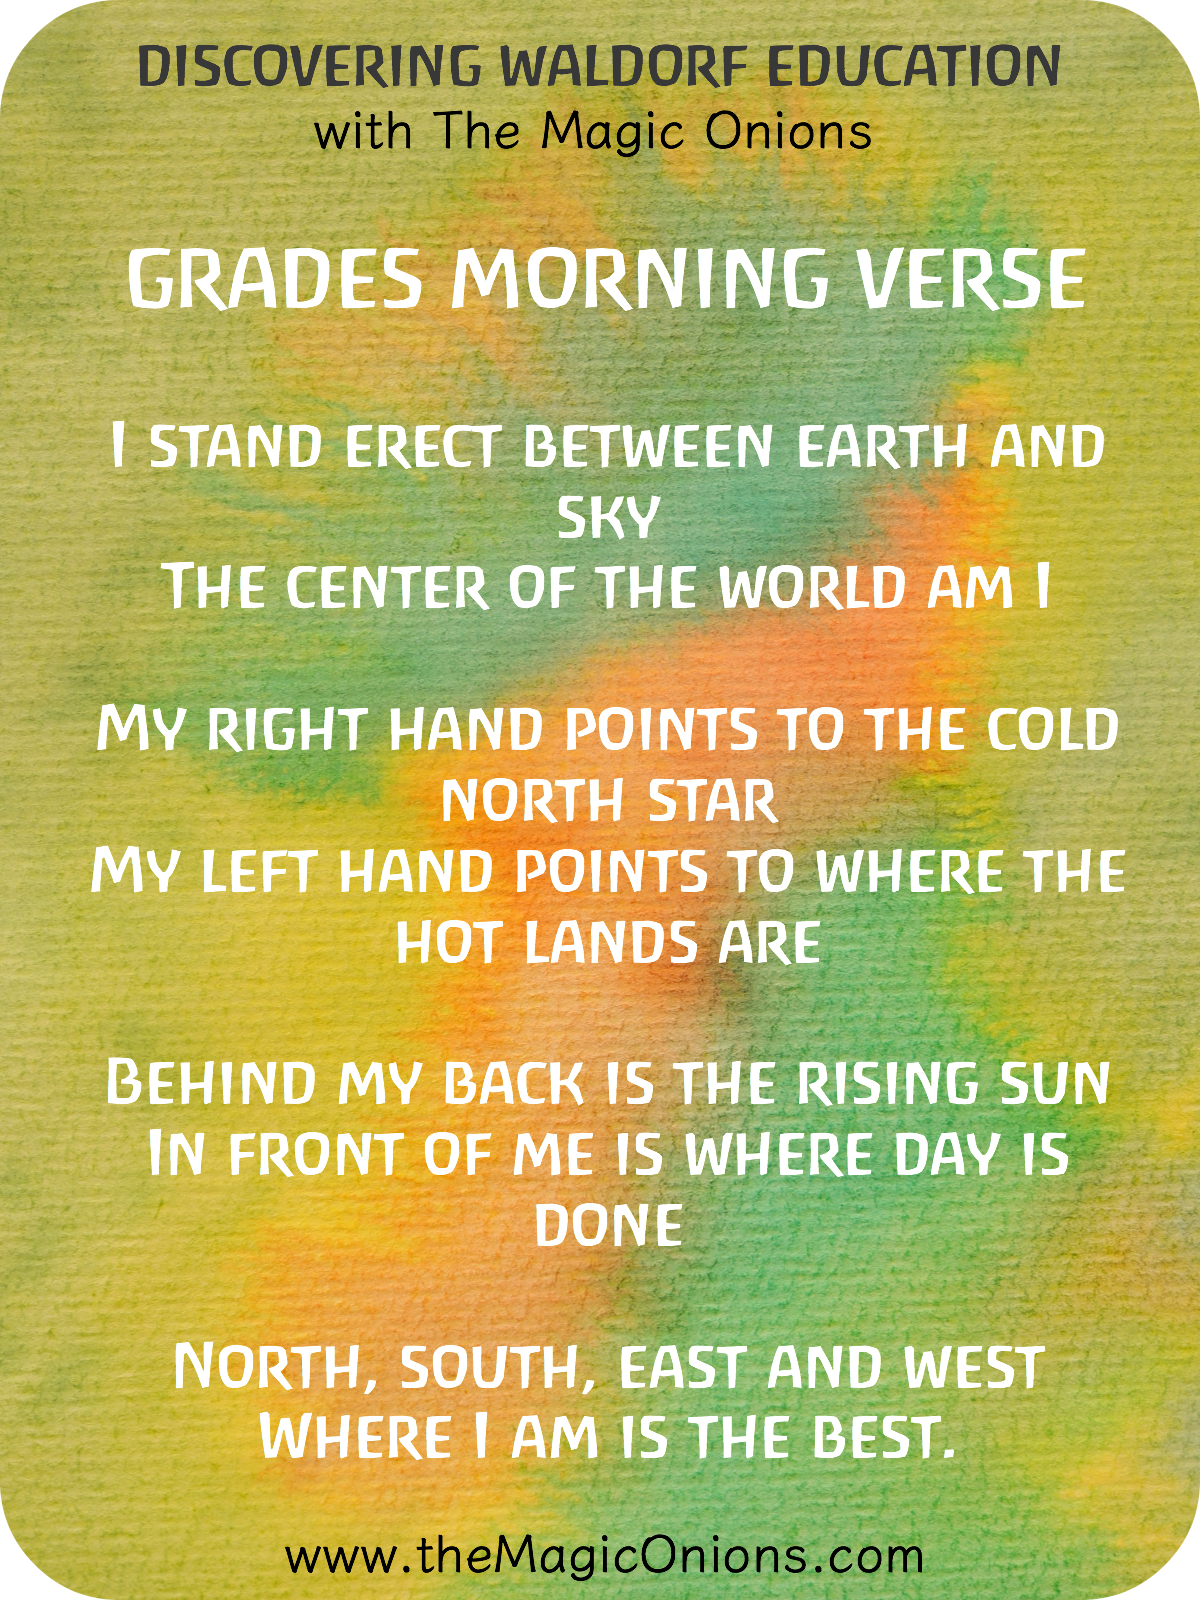 Waldorf Morning Verses for the Grades : I stand erect between earth and sky